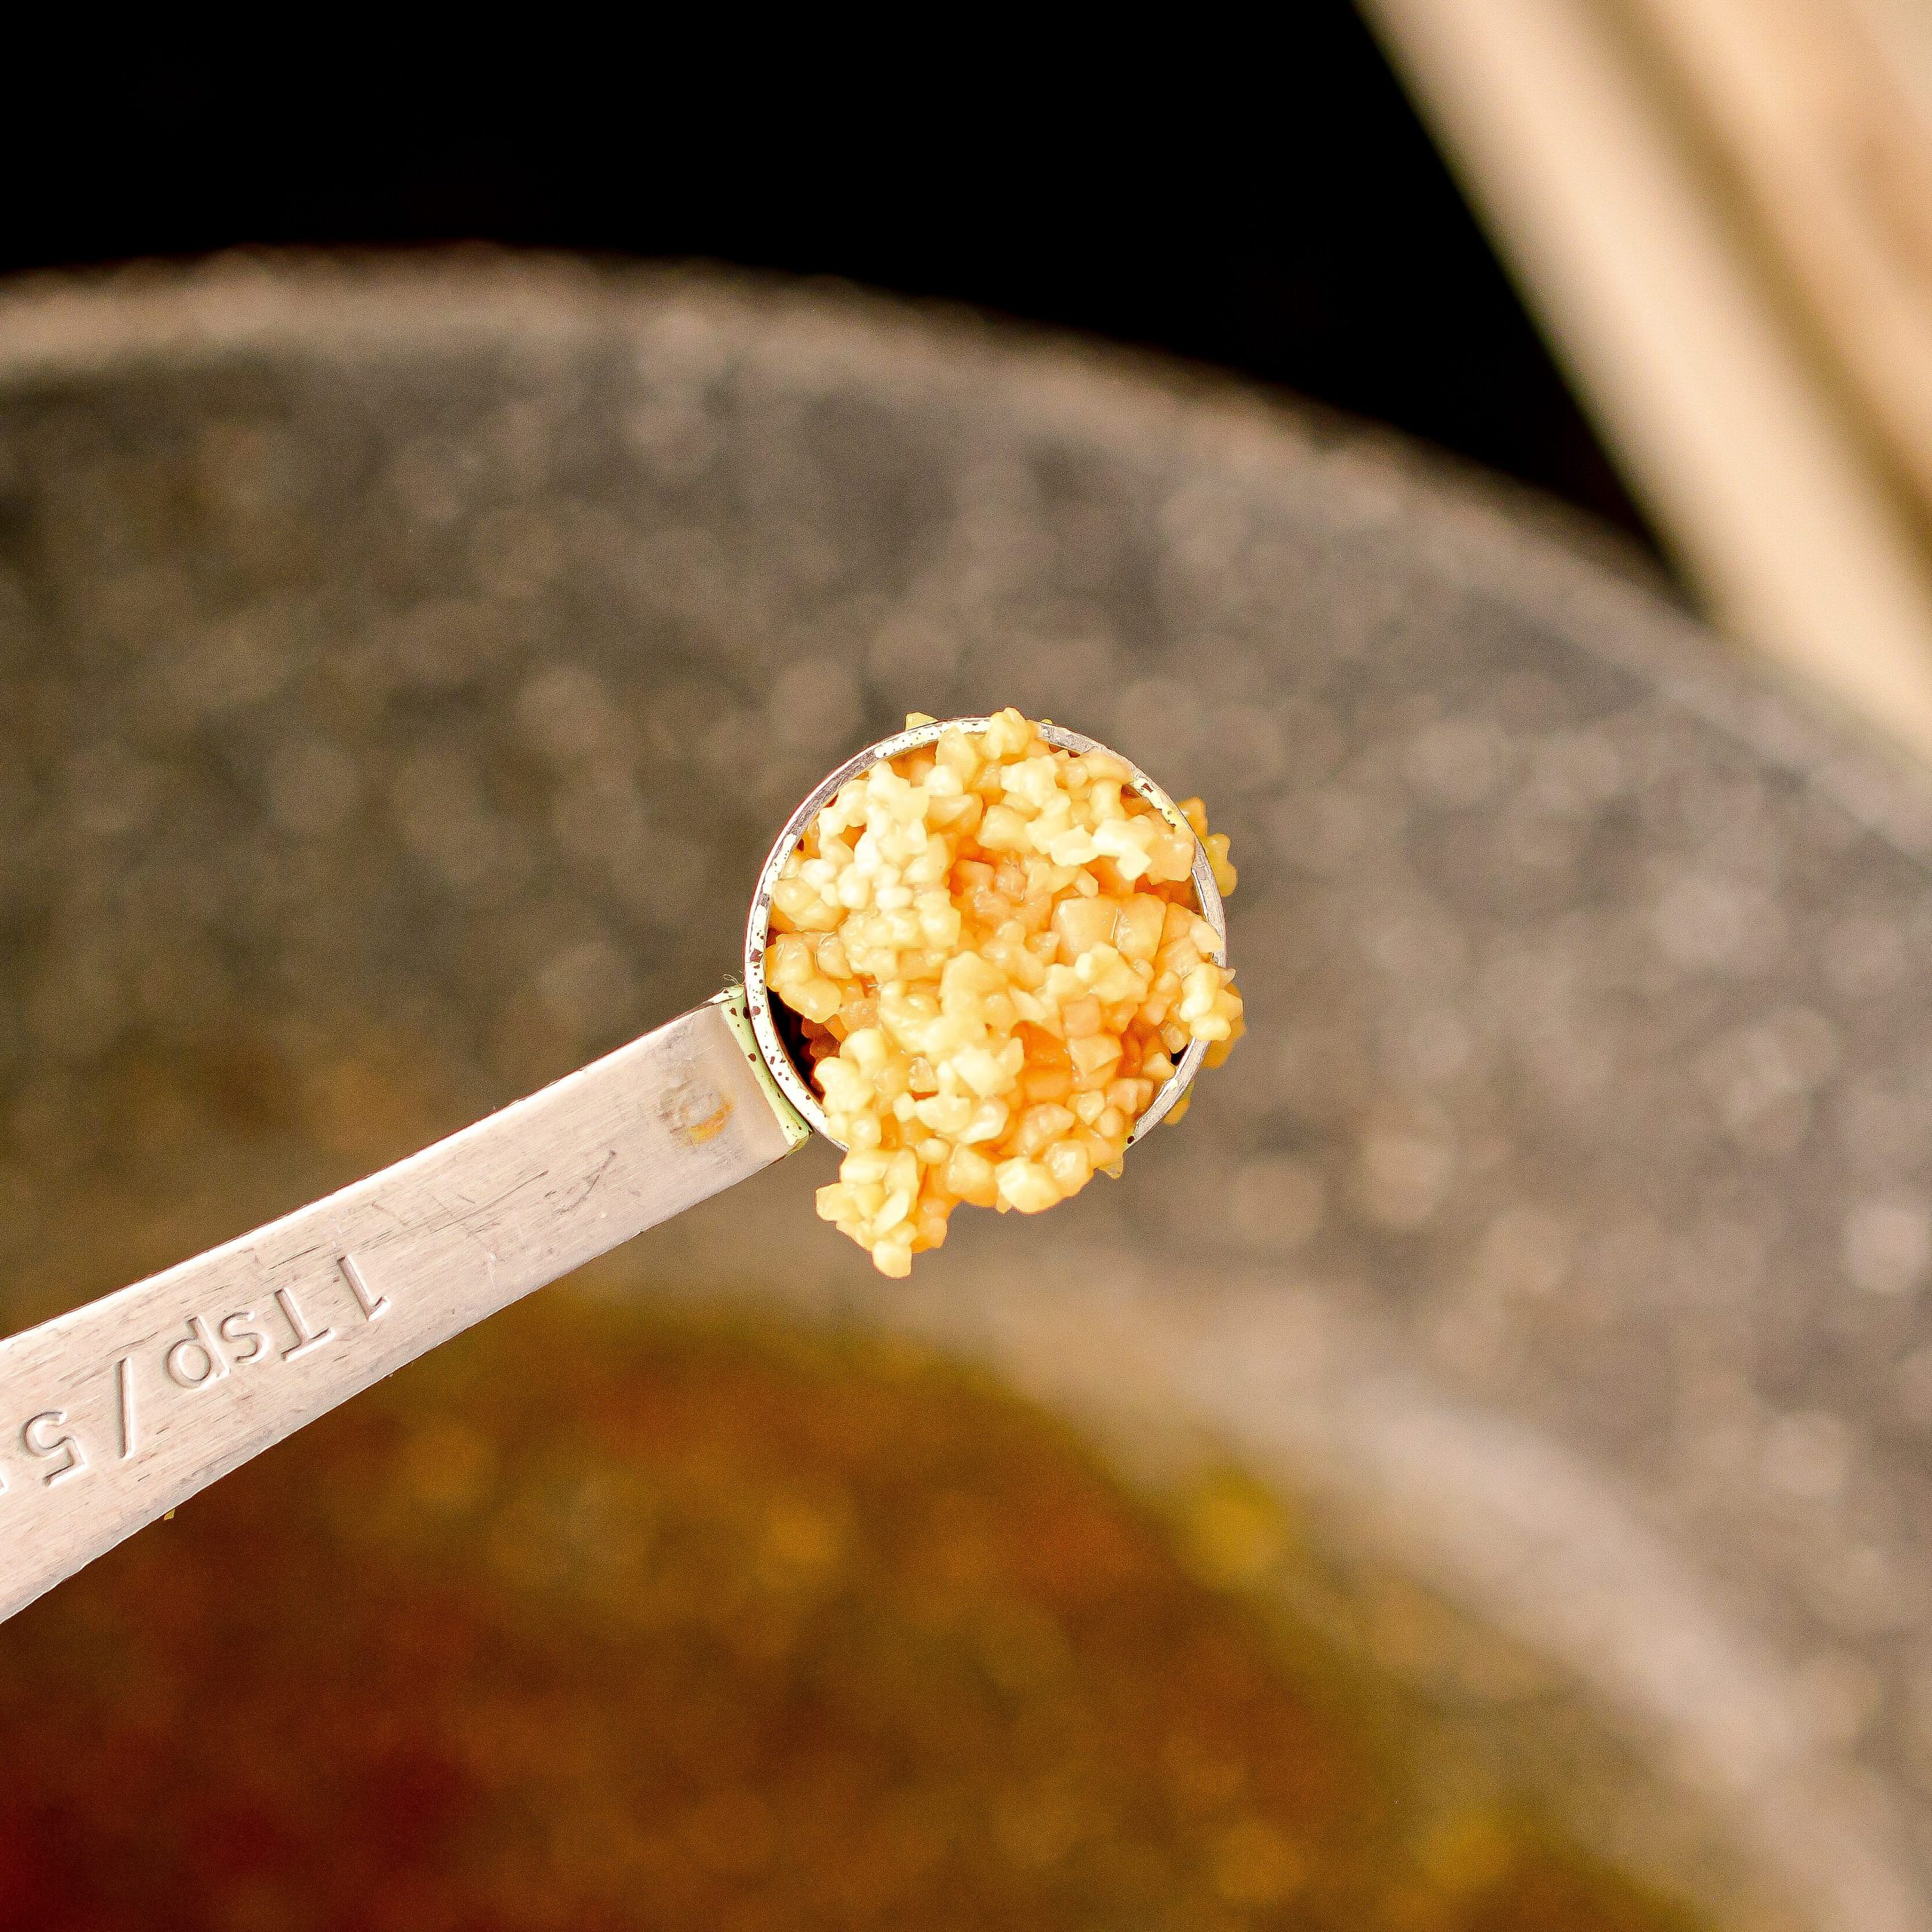 Heat the sesame oil in the same skillet, mix in the garlic and saute for 30 seconds.